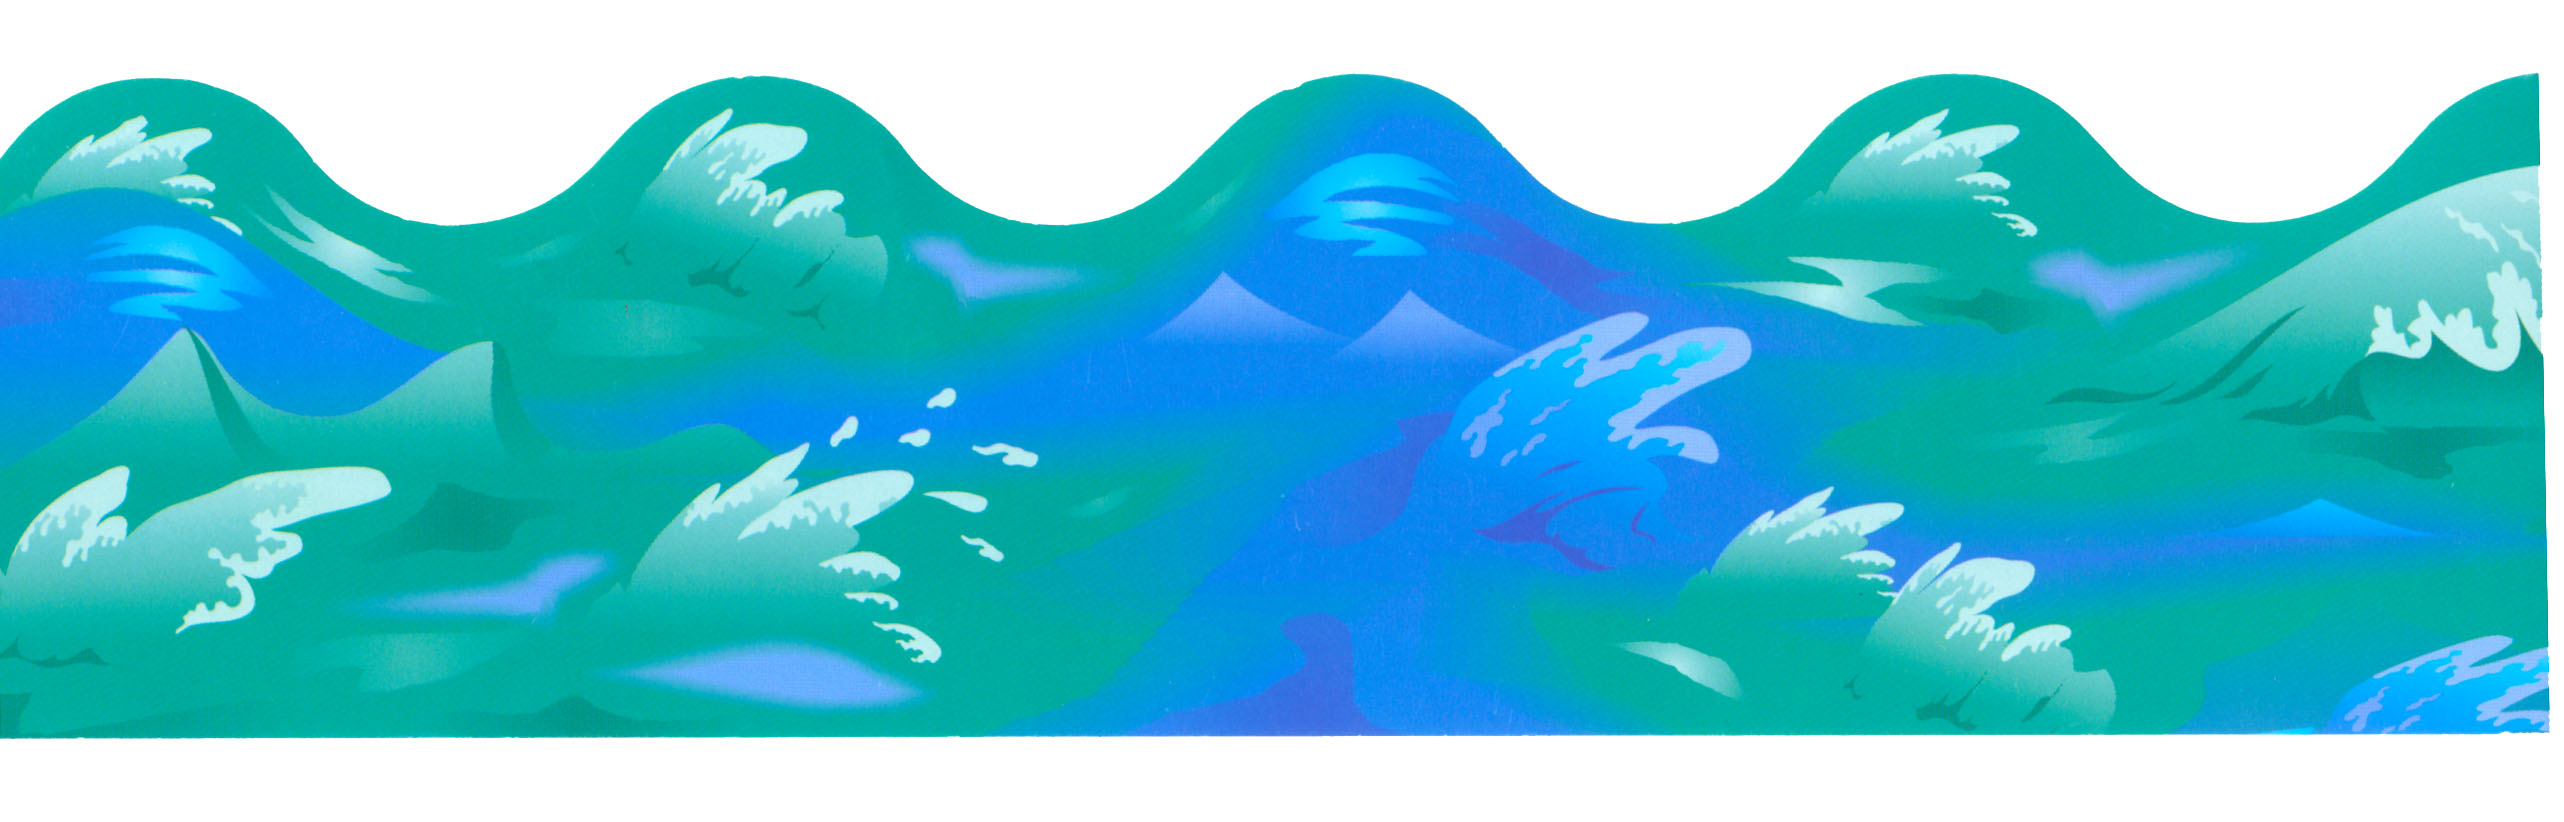 Water Waves Border Clipart Cl